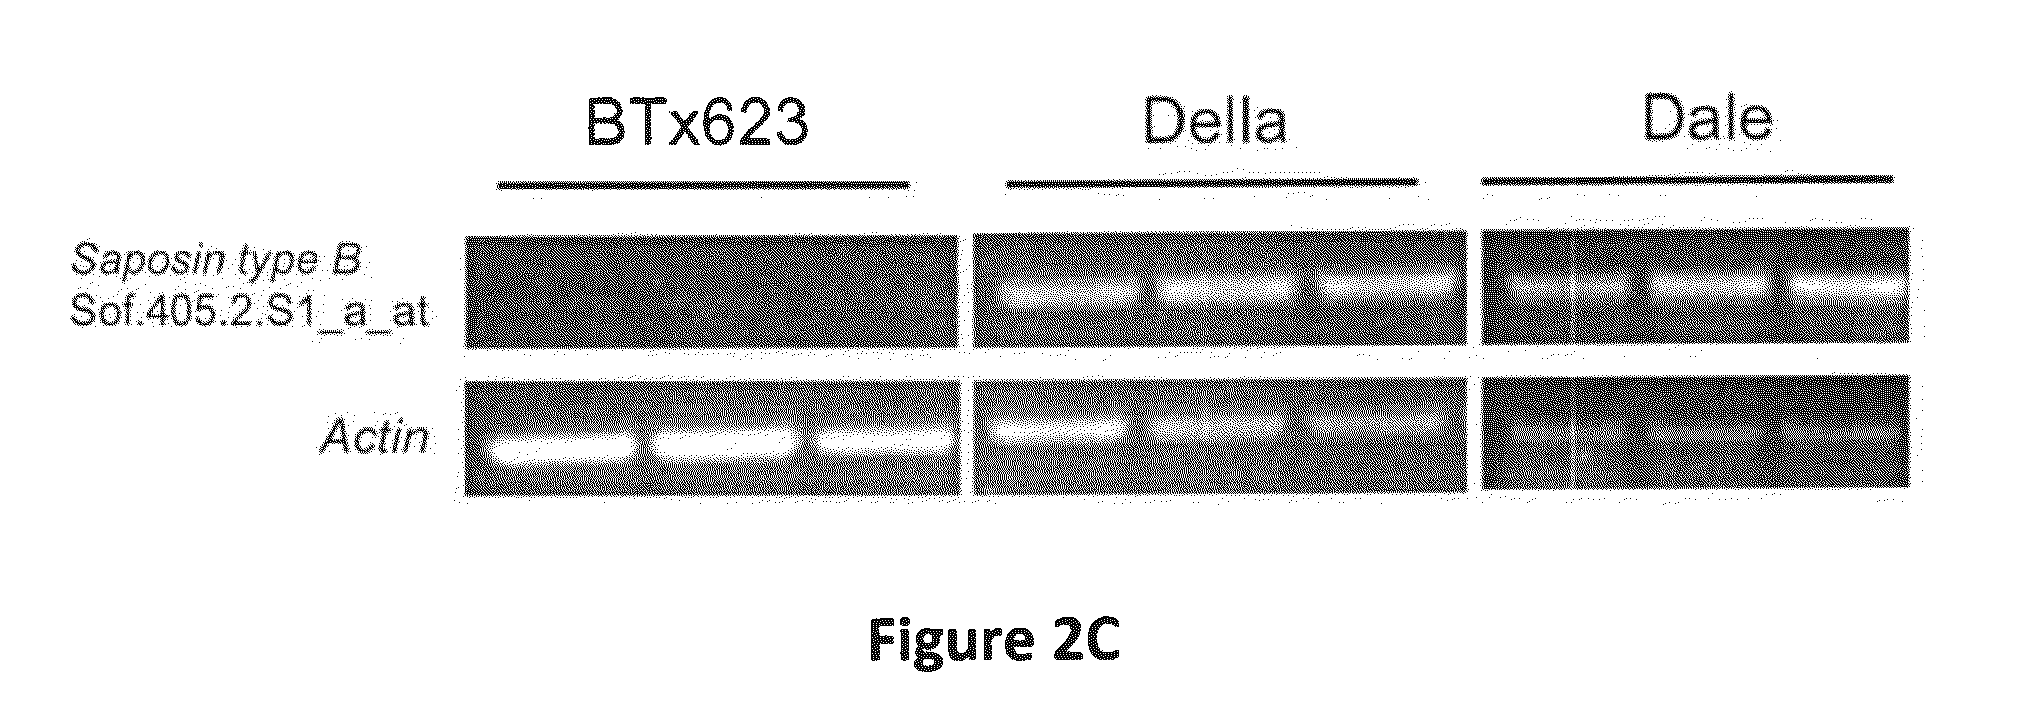 Compositions and Methods for Biofuel Crops